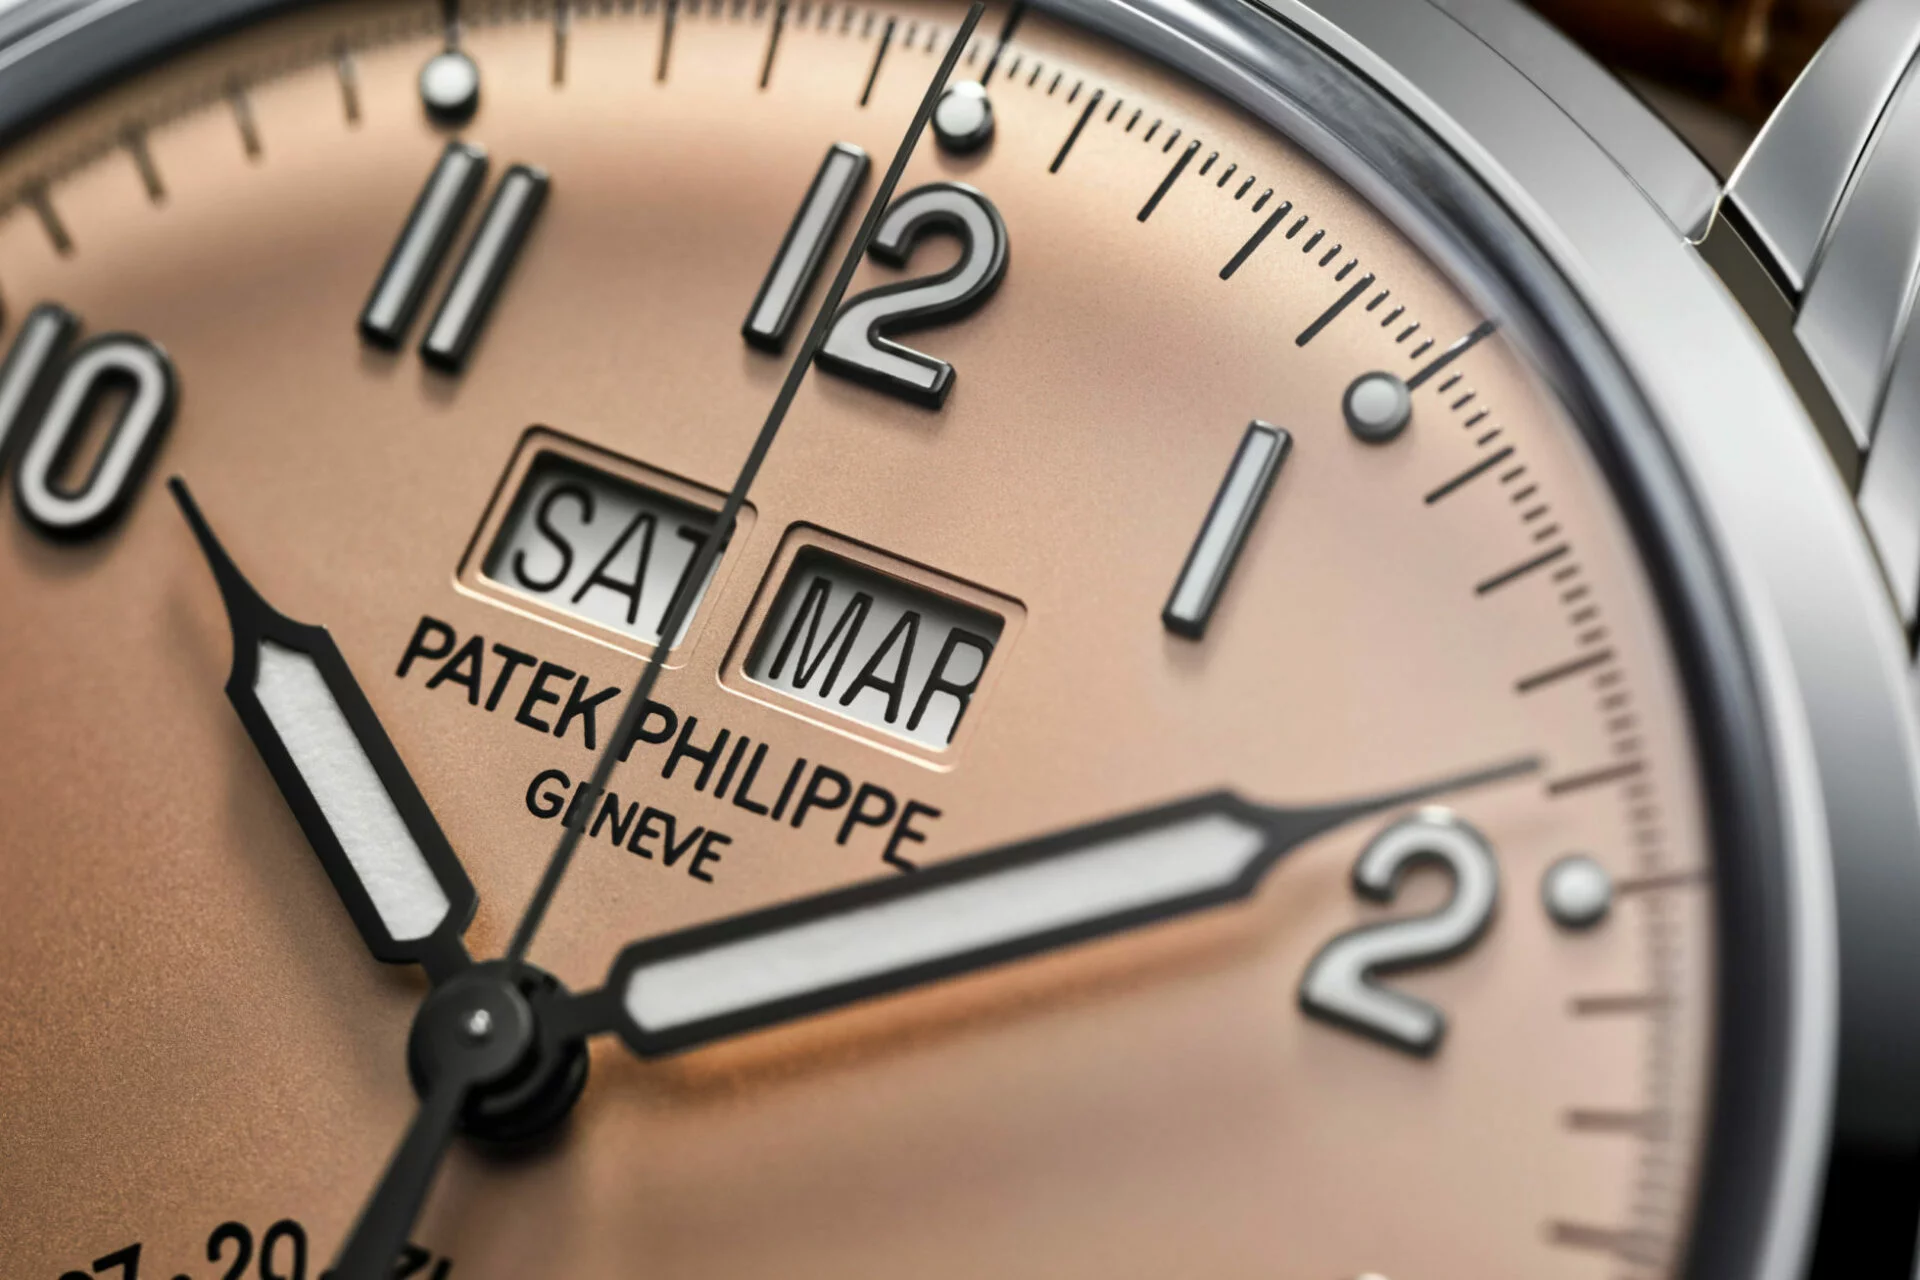 The Complete Buying Guide to a Patek Philippe Watch